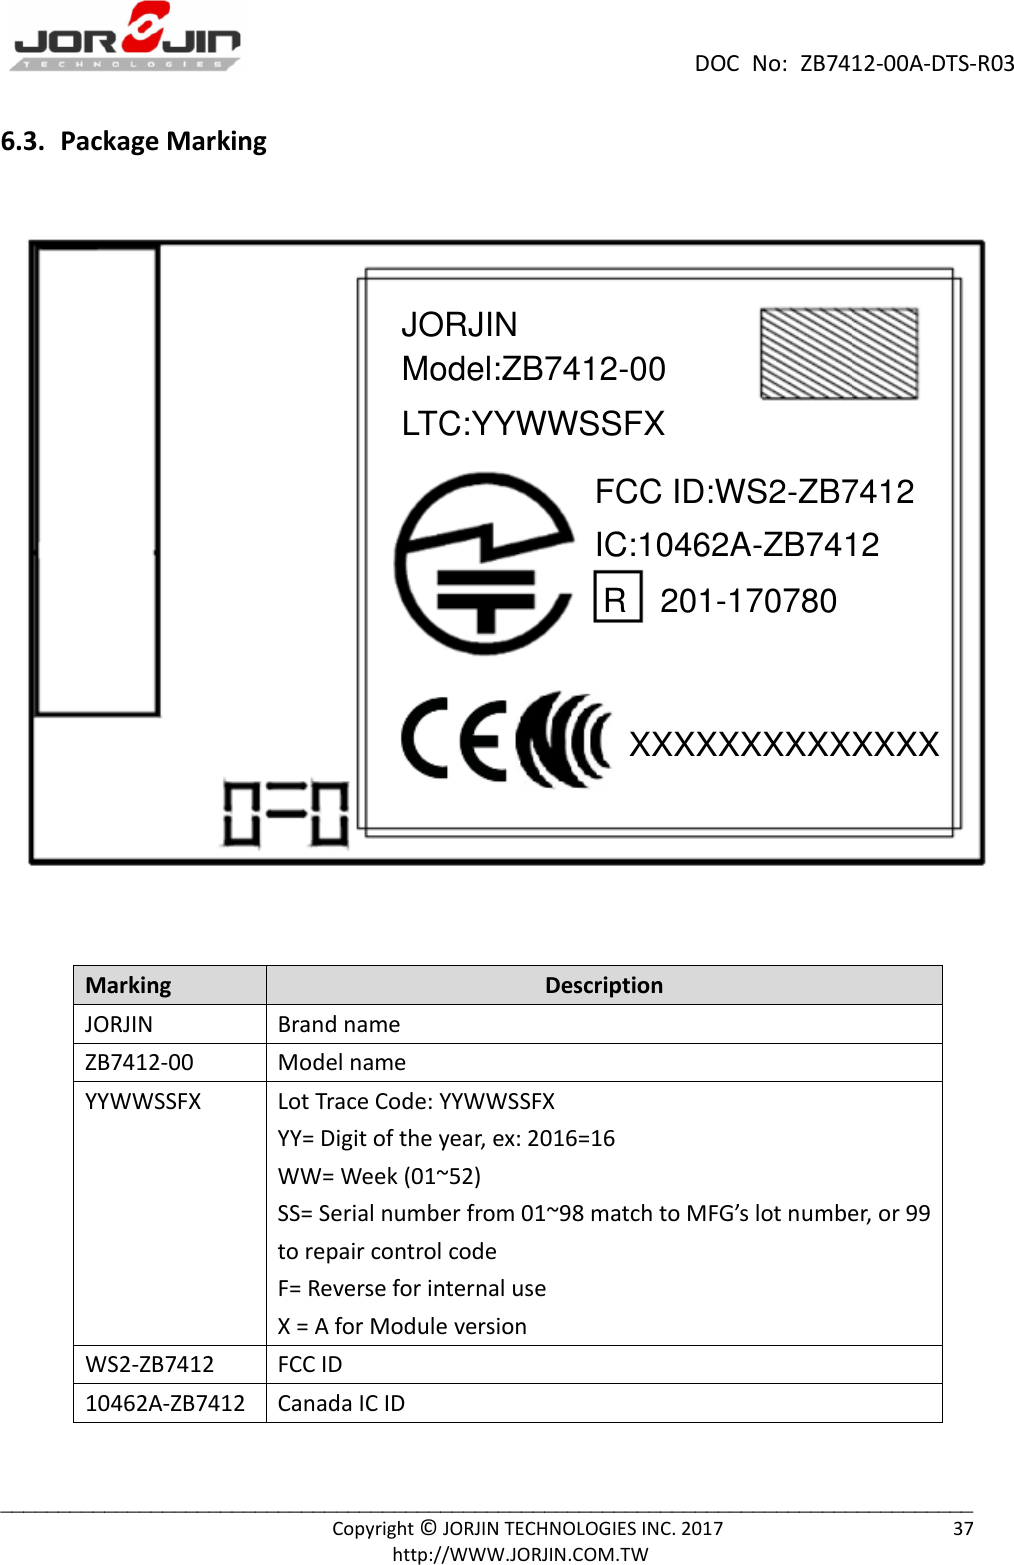                                            DOC  No:  ZB7412-00A-DTS-R03  ____________________________________________________________________________________         Copyright © JORJIN TECHNOLOGIES INC. 2017                                            37             http://WWW.JORJIN.COM.TW 6.3.  Package Marking     Marking Description JORJIN Brand name ZB7412-00 Model name YYWWSSFX Lot Trace Code: YYWWSSFX YY= Digit of the year, ex: 2016=16 WW= Week (01~52) SS= Serial number from 01~98 match to MFG’s lot number, or 99 to repair control code F= Reverse for internal use X = A for Module version WS2-ZB7412 FCC ID 10462A-ZB7412 Canada IC ID R   201-170780 JORJIN   IC:10462A-ZB7412 FCC ID:WS2-ZB7412 XXXXXXXXXXXXXX Model:ZB7412-00   LTC:YYWWSSFX  